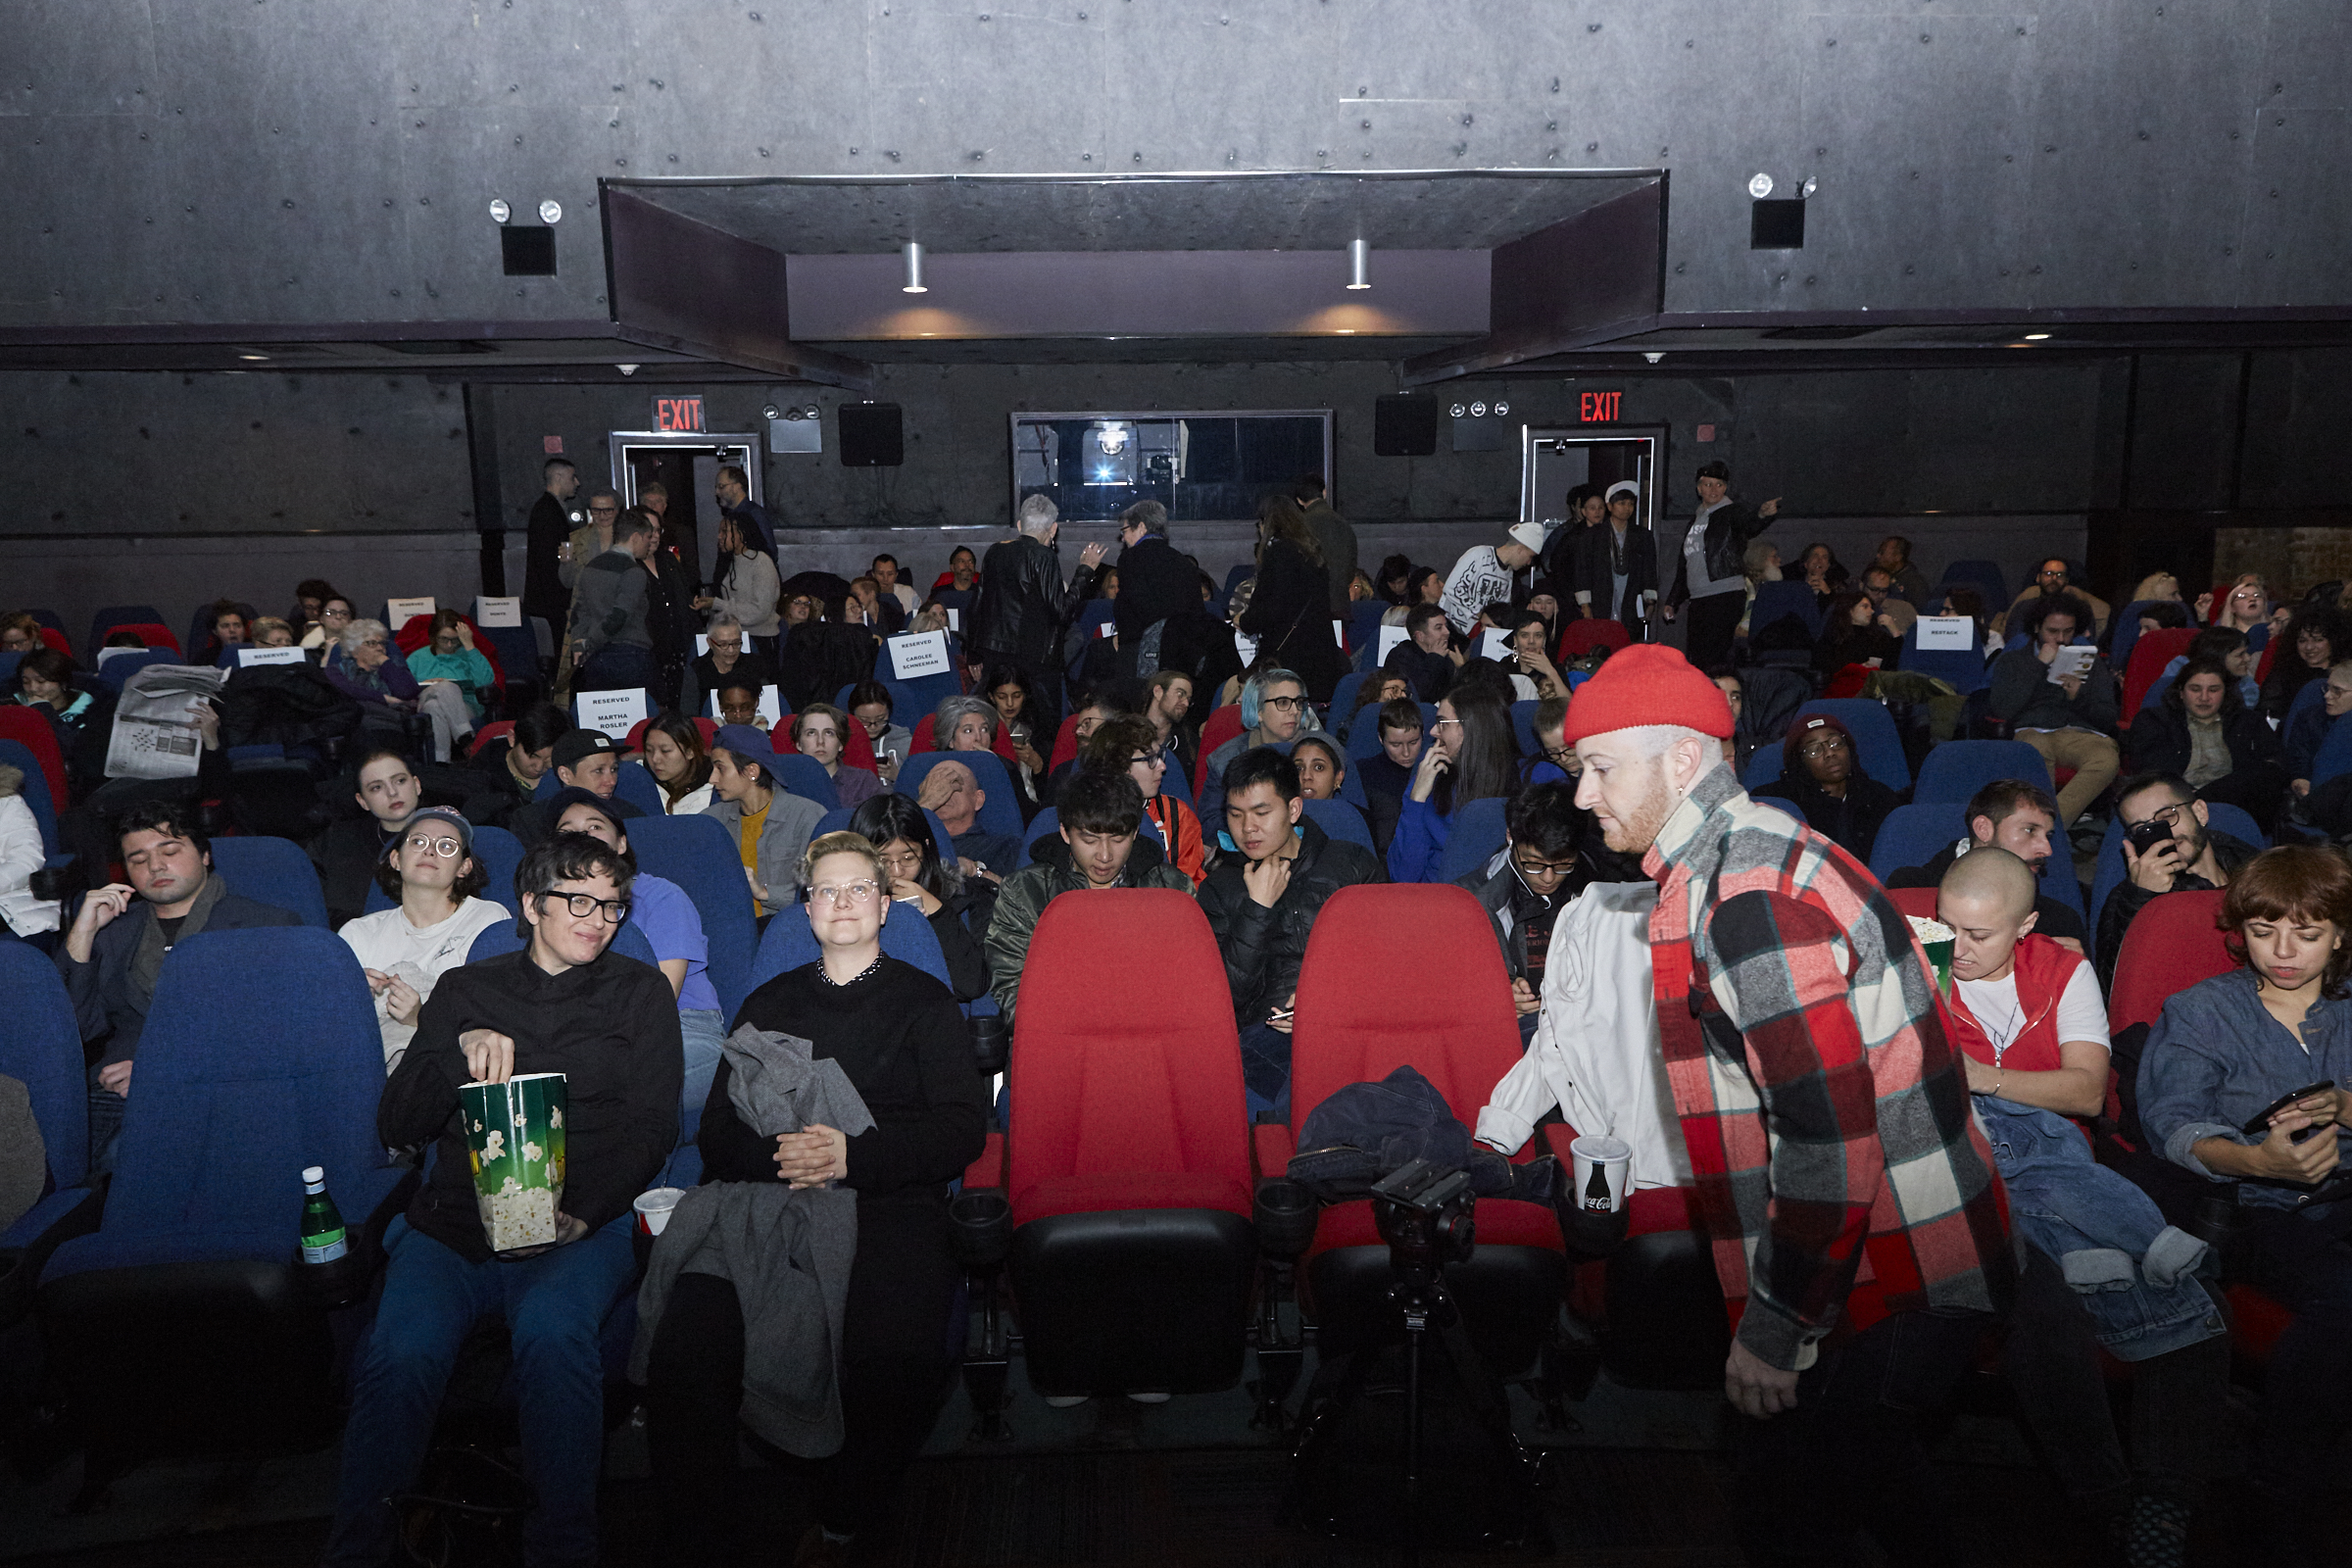  Audience at "The Hammer" Mix (Photo by Eric McNatt) 